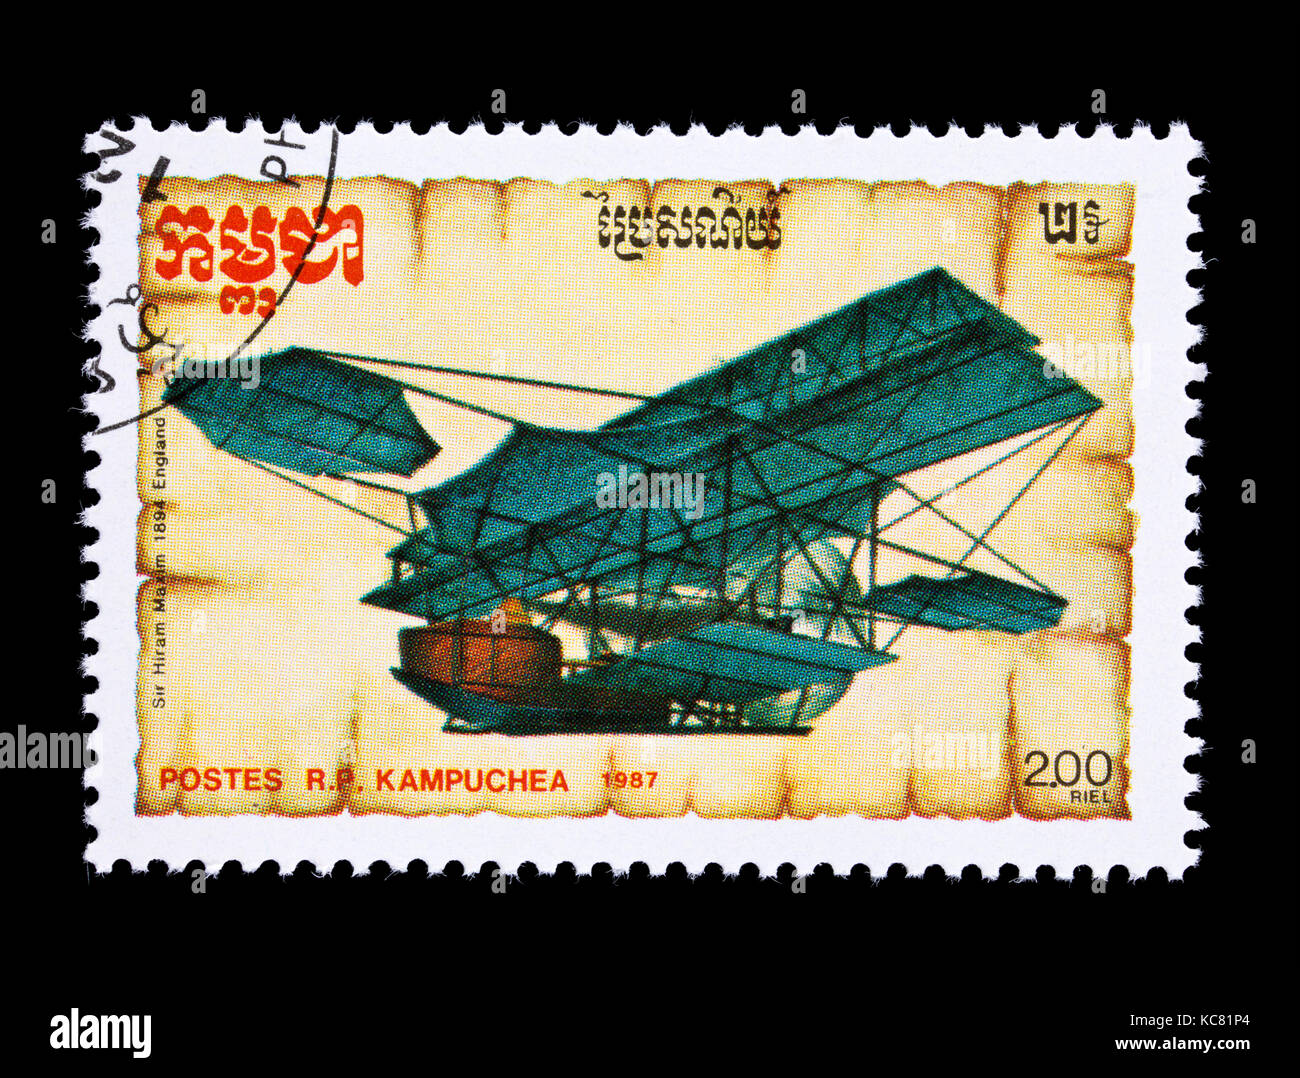 Postage stamp from Cambodia (Kampuchea)depicting an early airplane design by Sir Hiram Maxim, 1894. Stock Photo